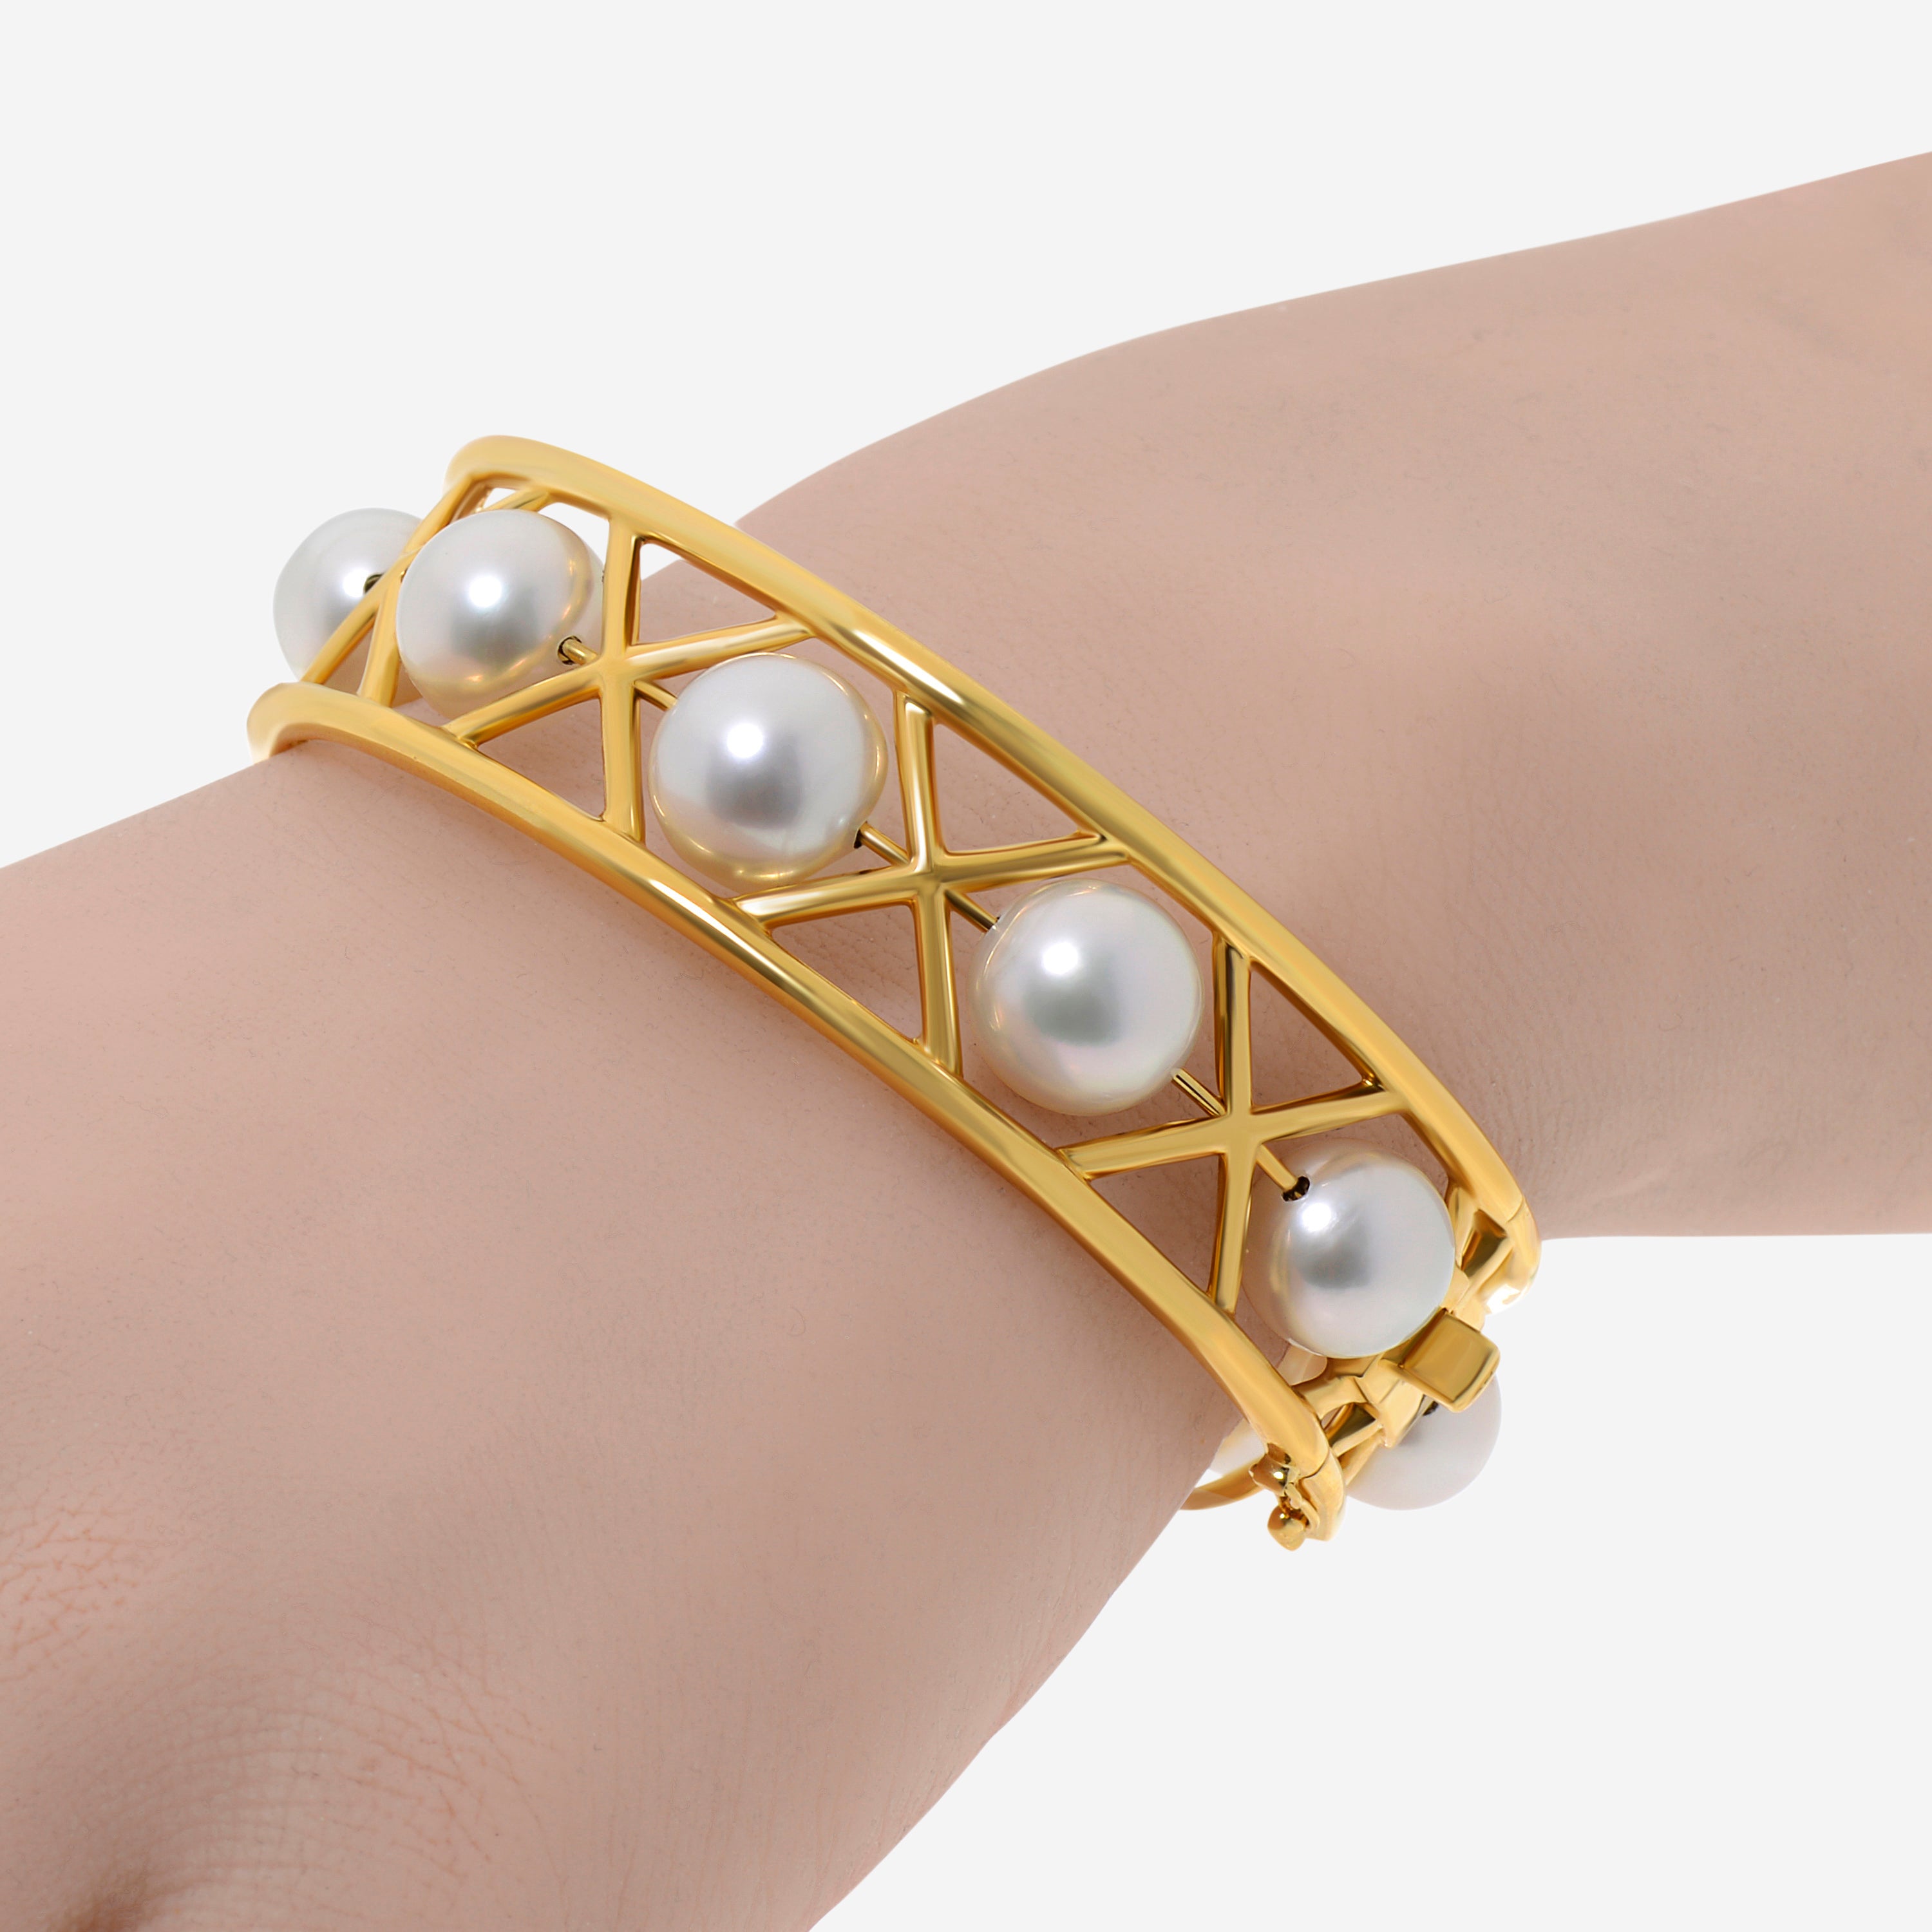 Assael 18K Yellow Gold, South Sea Cultured Pearl Bangle Bracelet B1715 - THE SOLIST